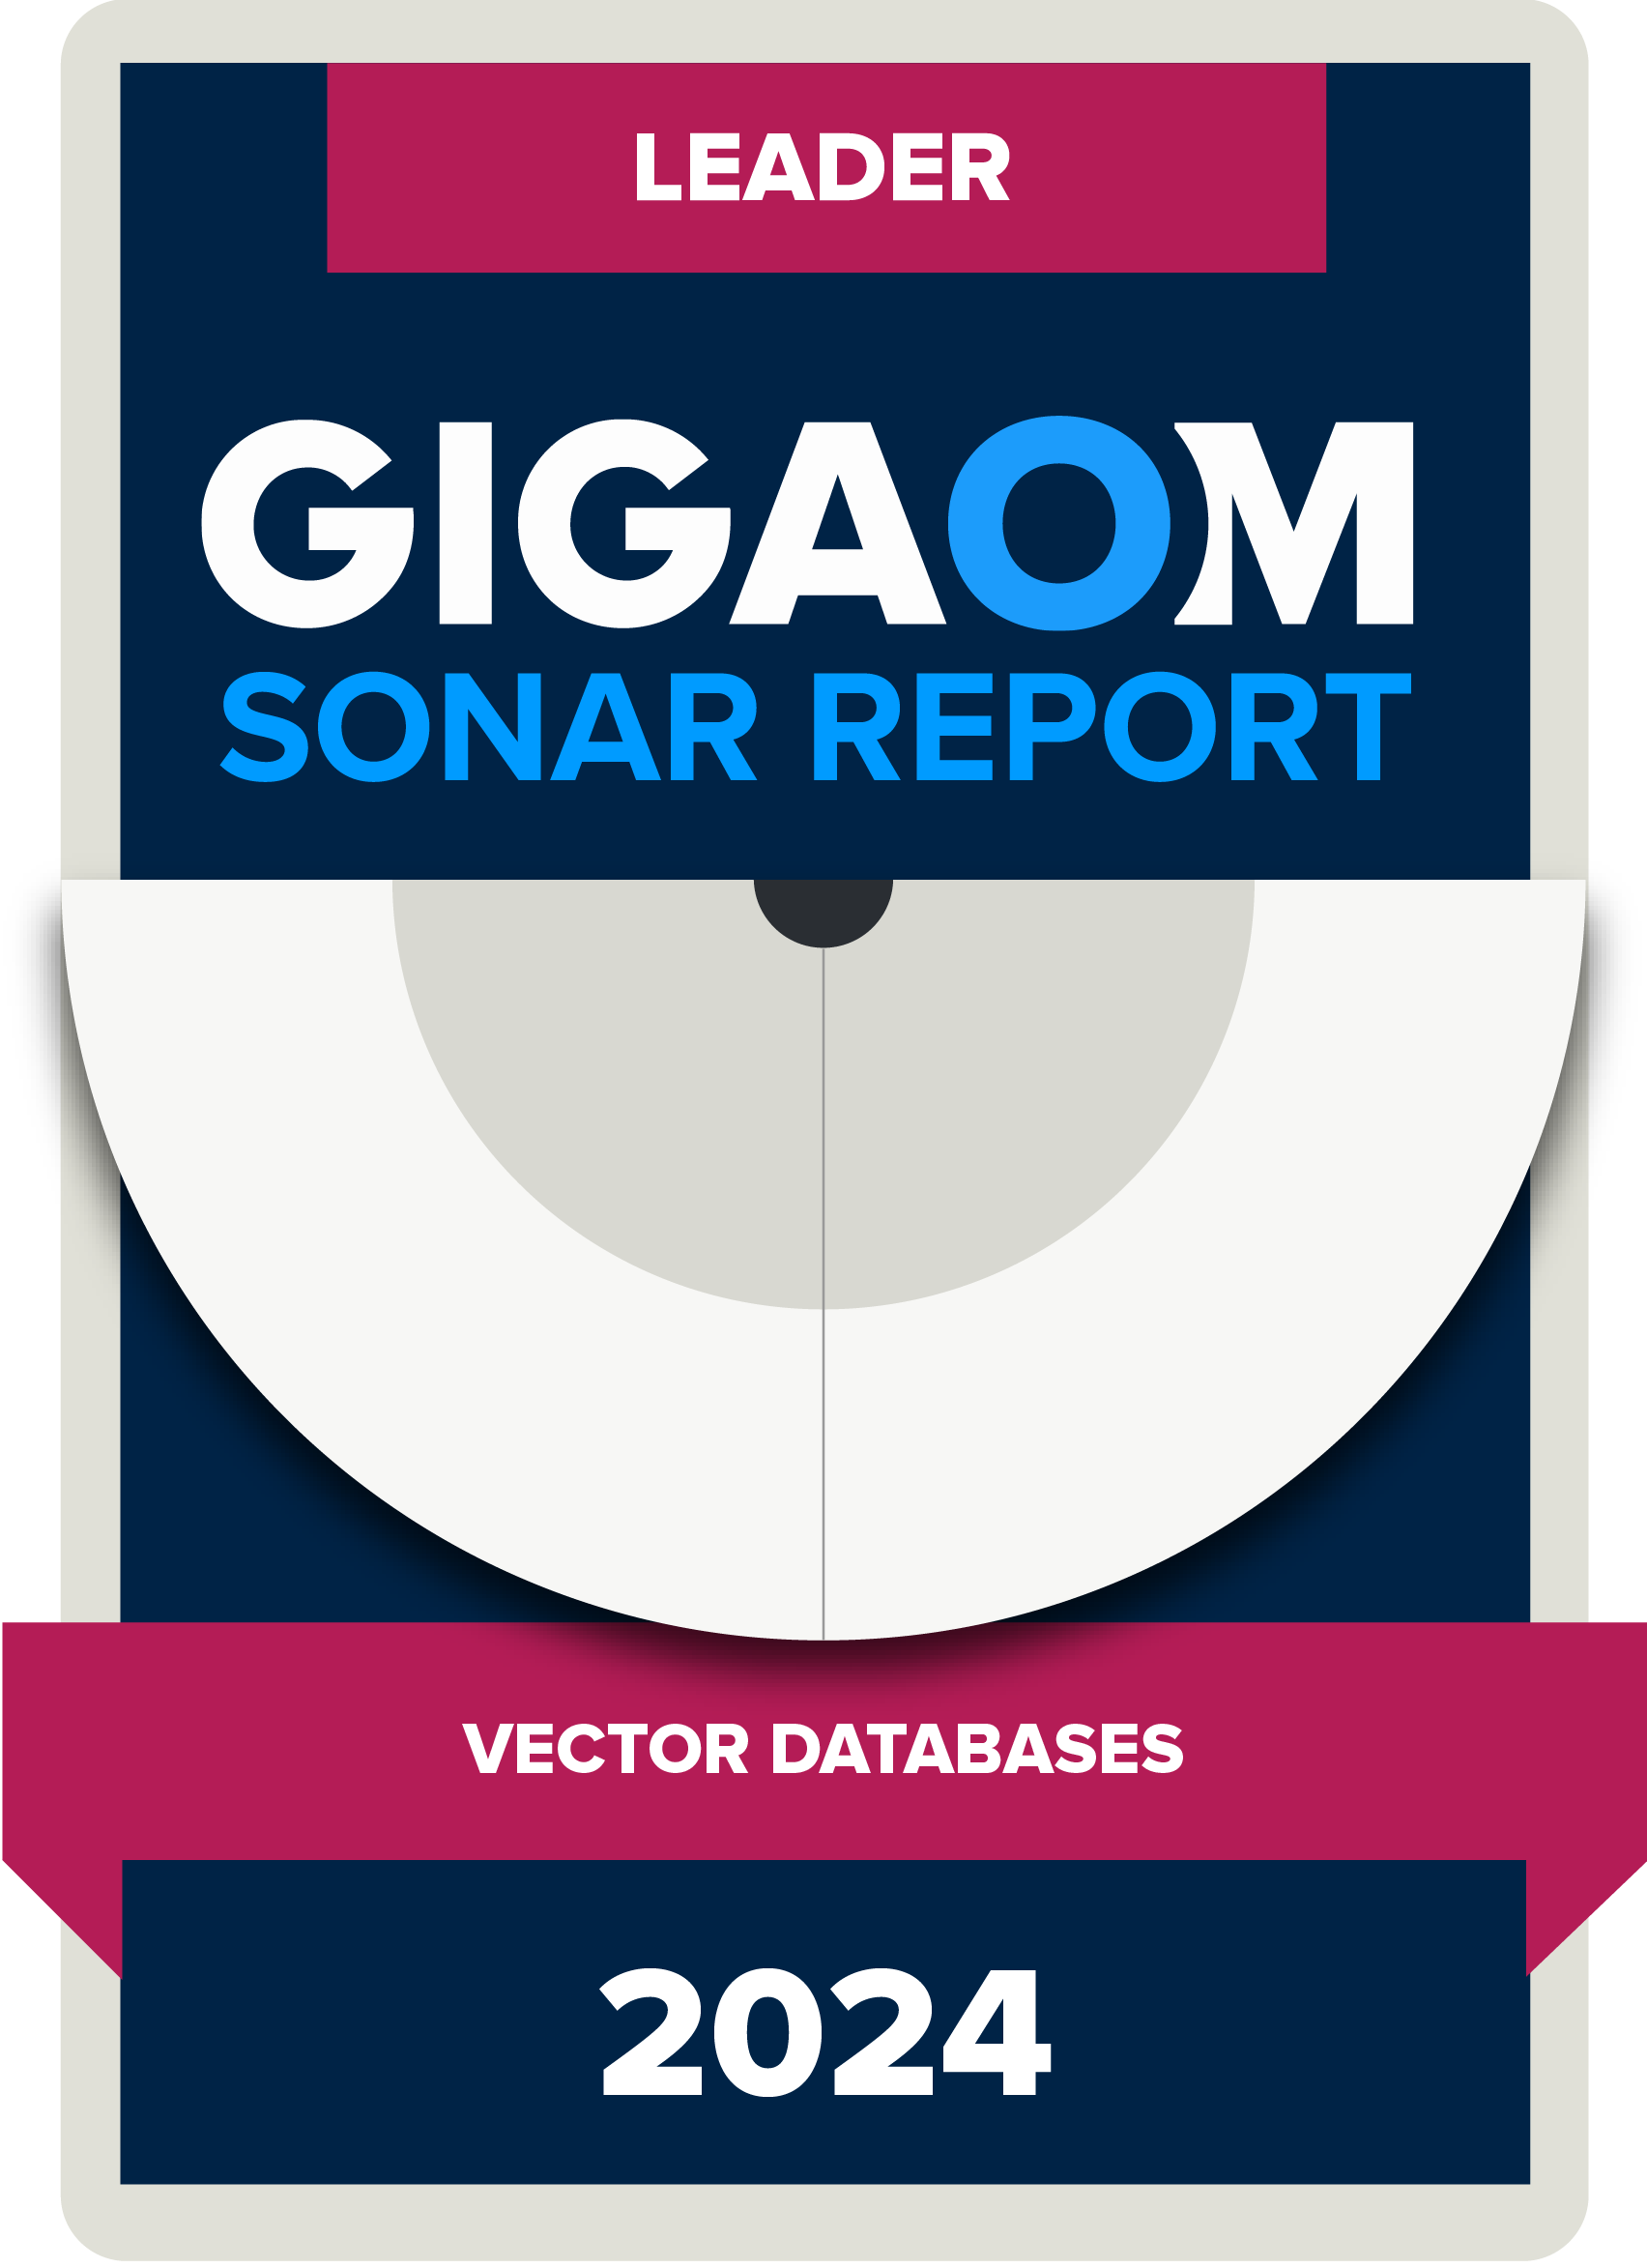 Vespa Recognized as a Leader and Forward Mover in GigaOm Sonar for Vector Databases